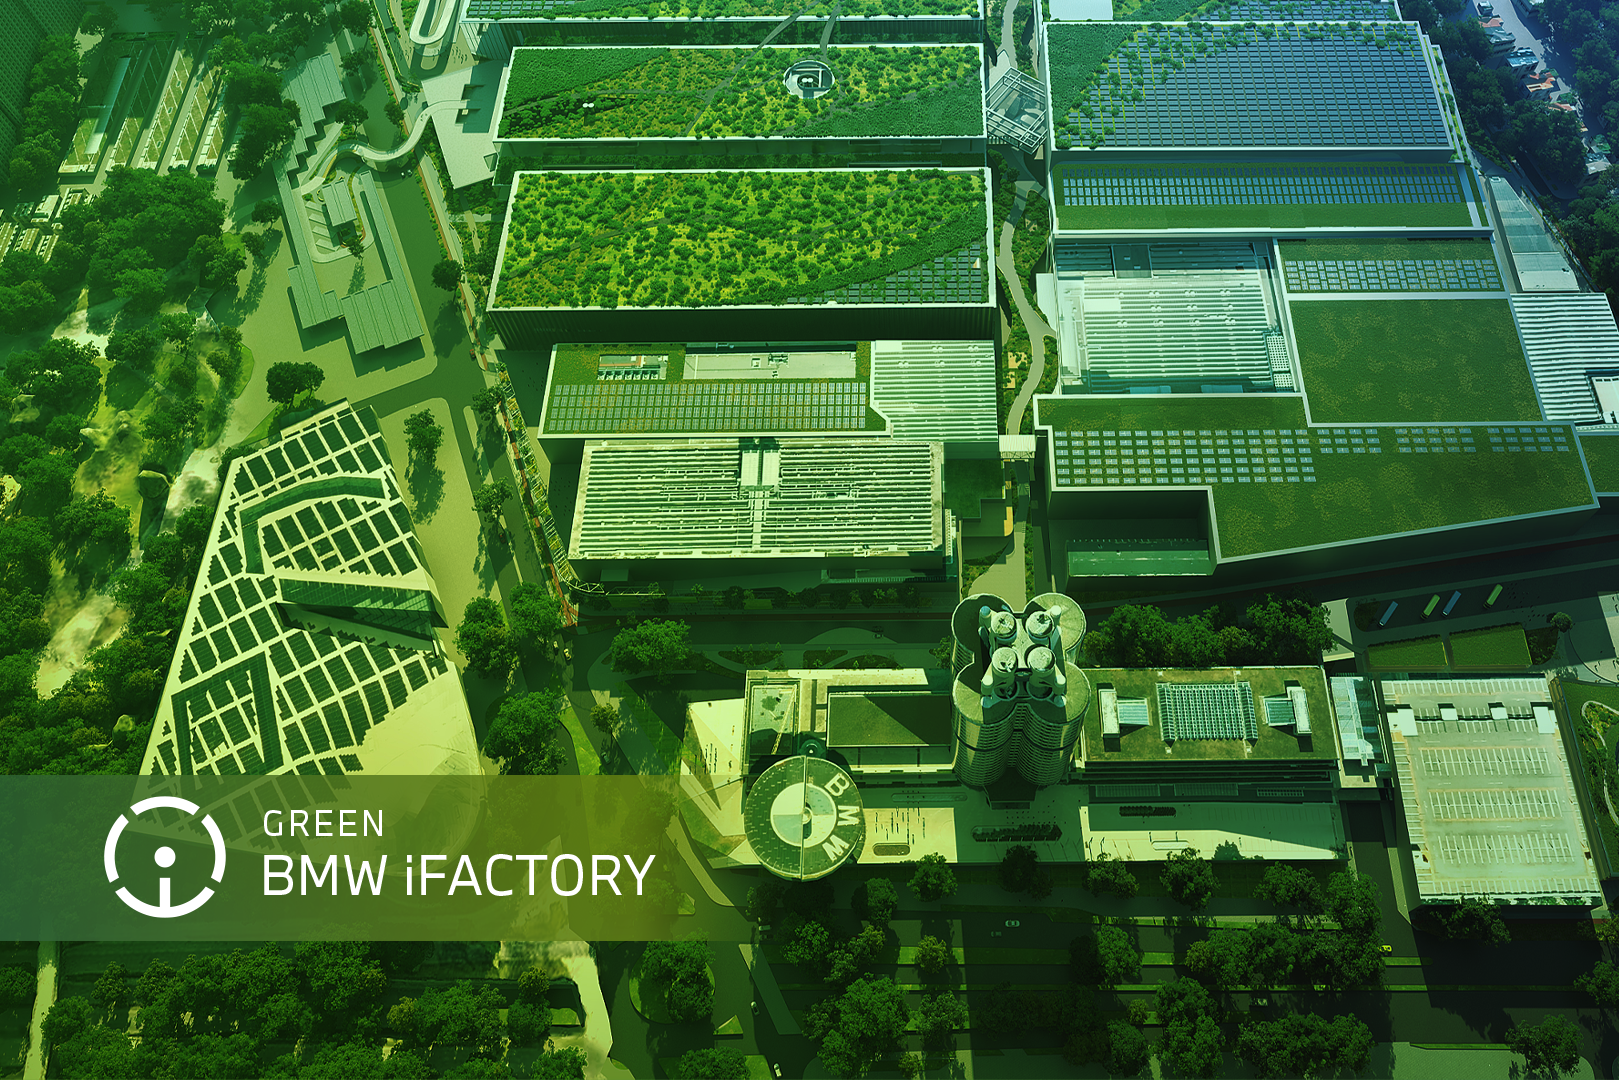 So GREEN ist die BMW <span class="grp-lowercase">i</span>FACTORY.